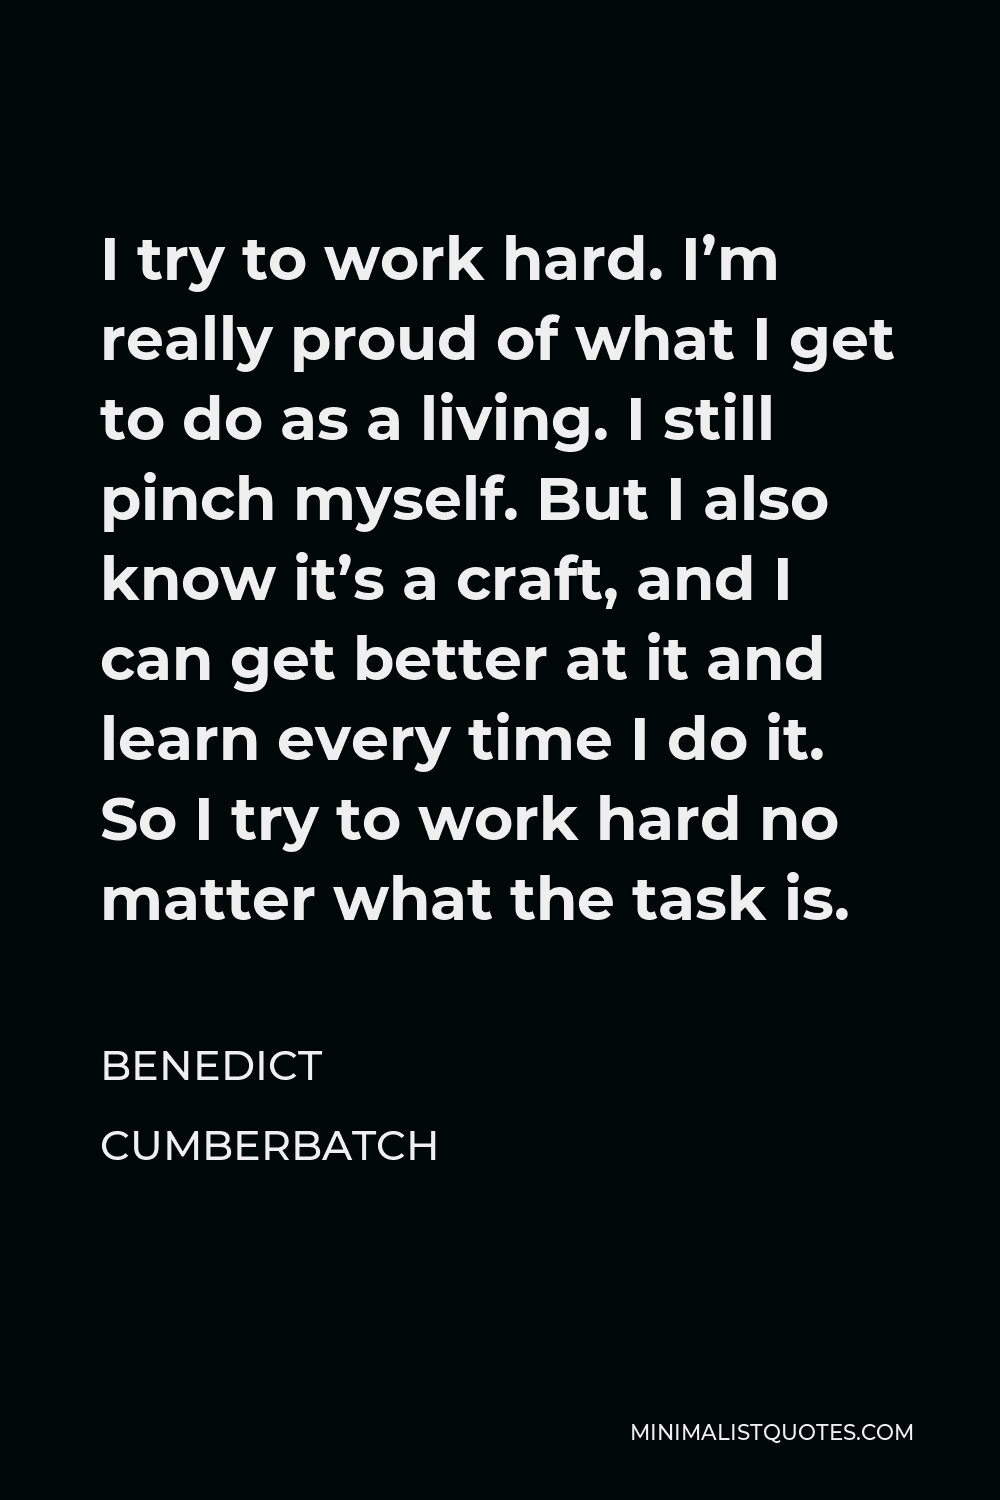 Benedict Cumberbatch Quote - I try to work hard. I’m really proud of what I get to do as a living. I still pinch myself. But I also know it’s a craft, and I can get better at it and learn every time I do it. So I try to work hard no matter what the task is.